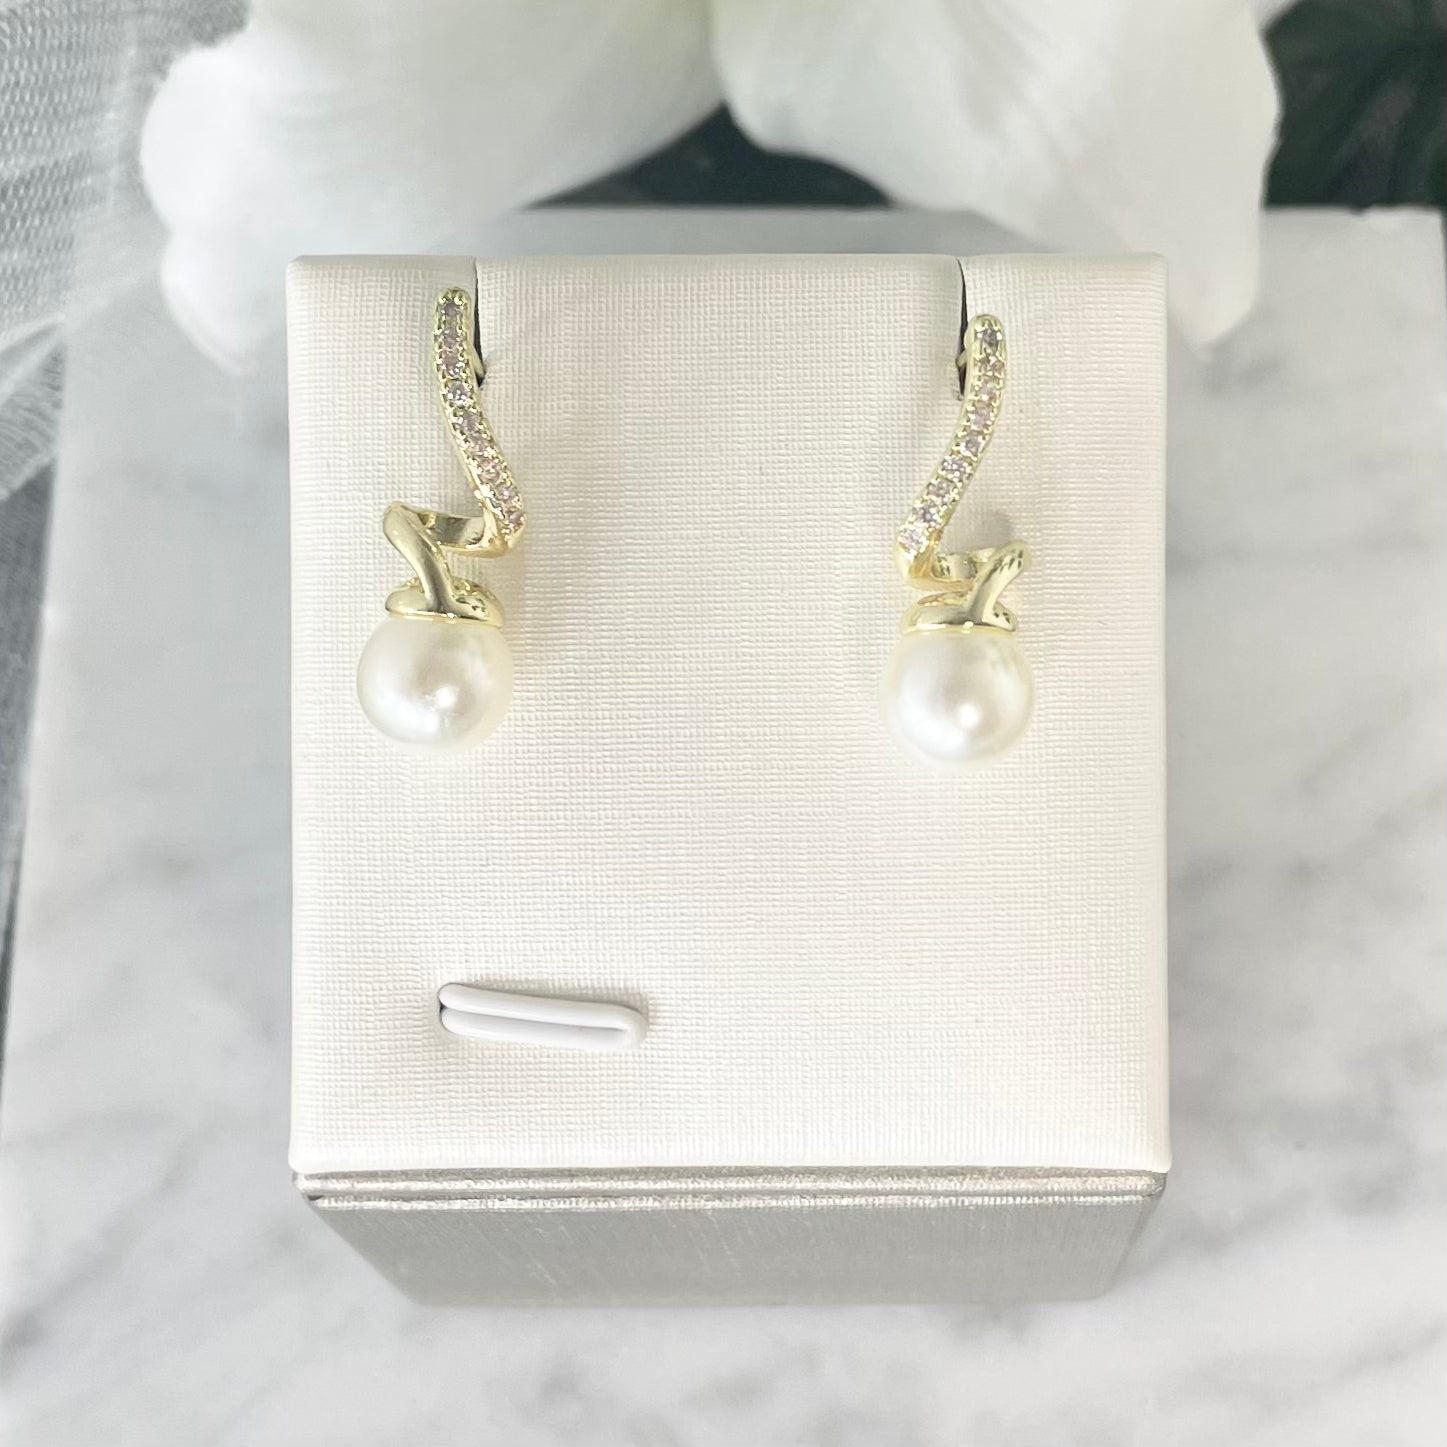 Close-up of Anastasia Pearl stud earrings showcasing the intricate zircon detailing and pearl.